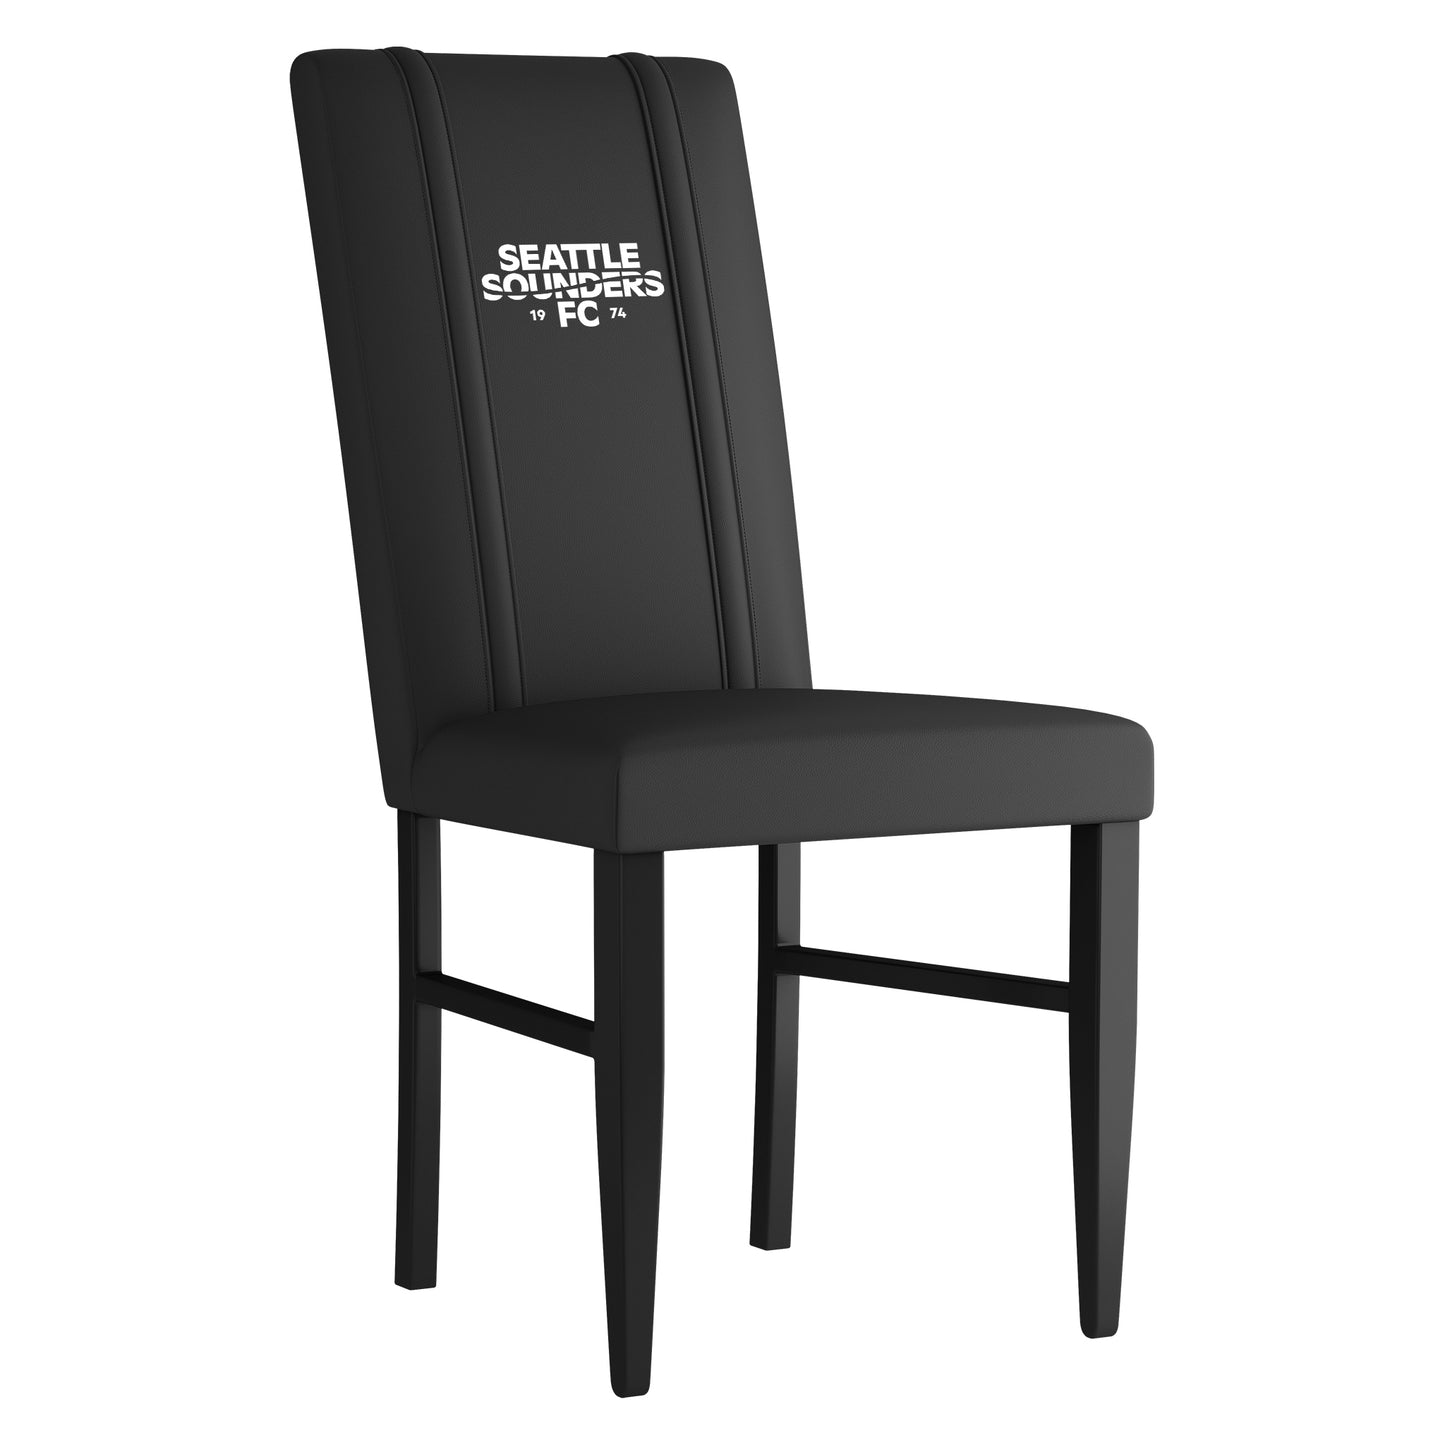 Side Chair 2000 with Seattle Sounders FC Secondary Logo Set of 2